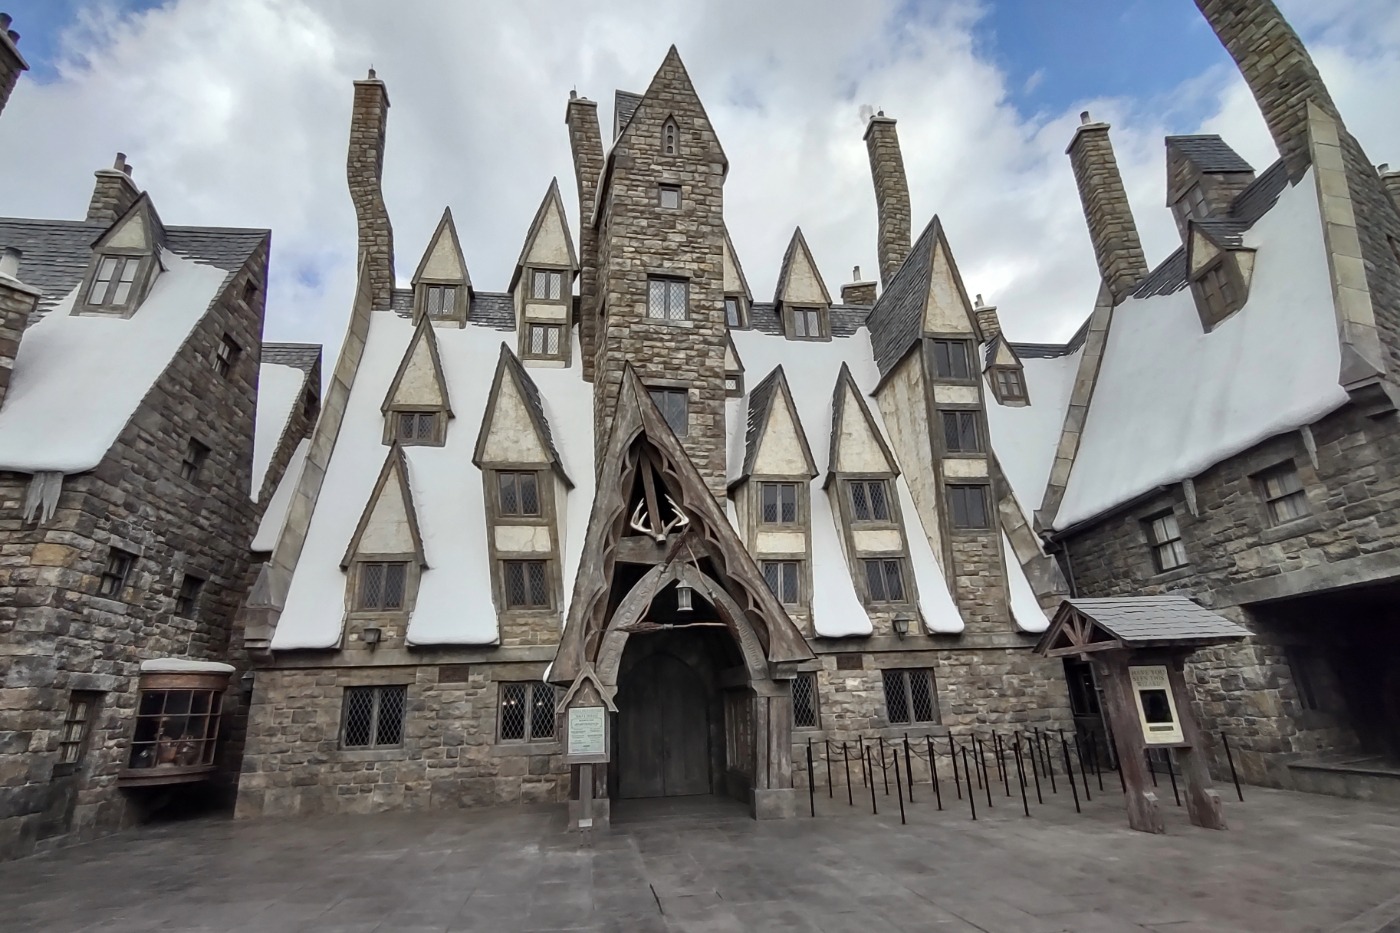 Harry Potter Hogsmeade Aesthetic theming in Japan